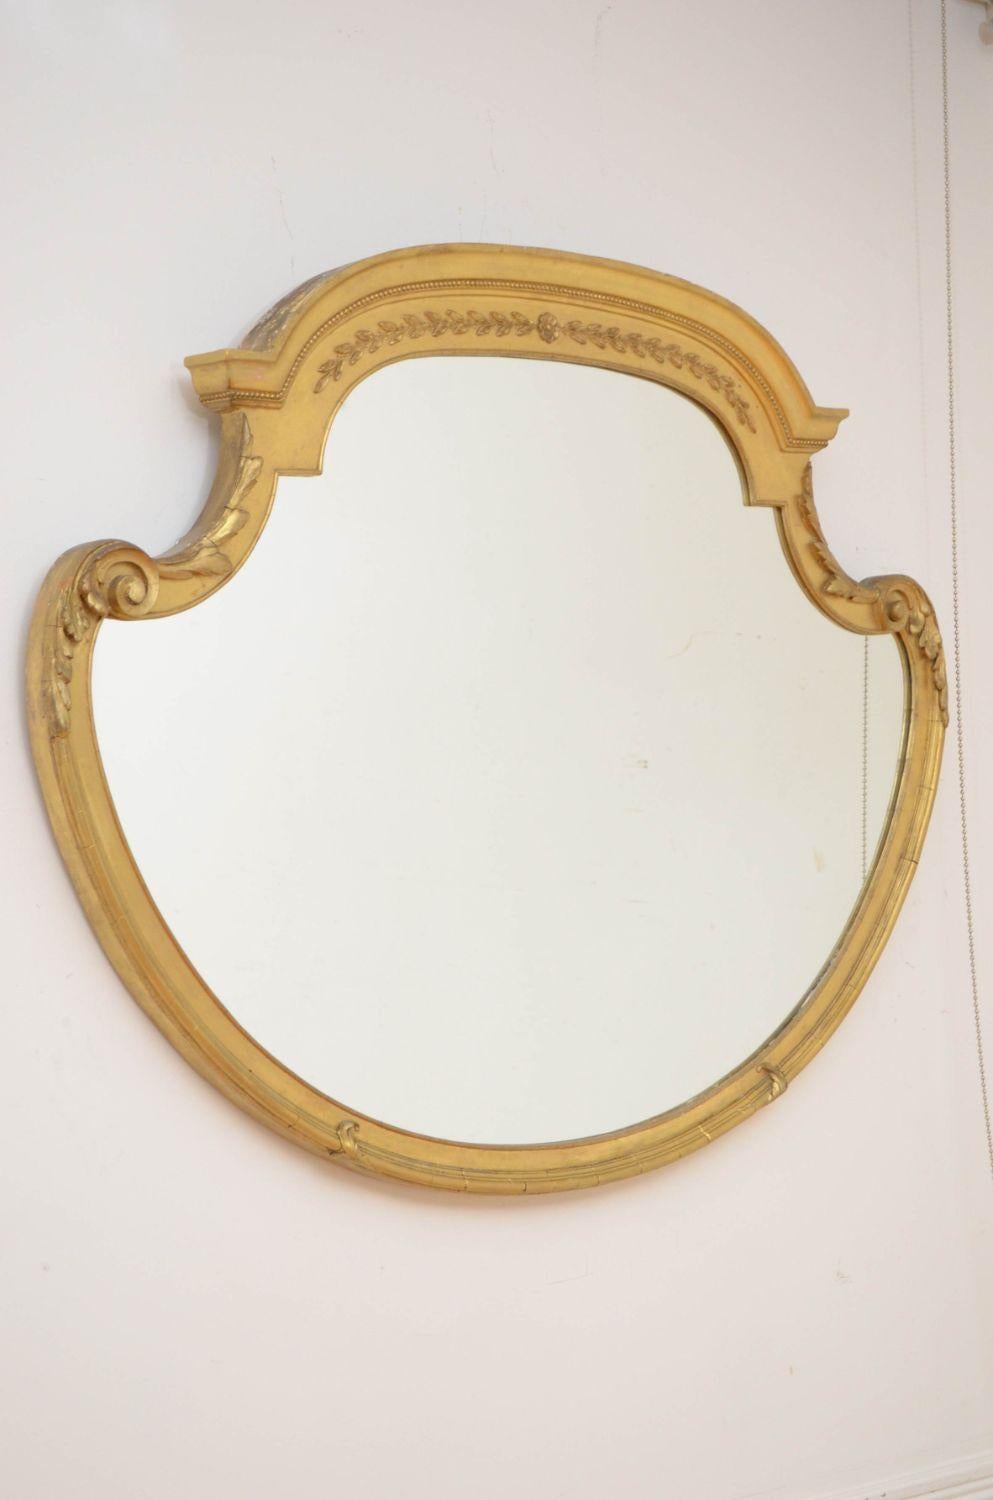 Sn4723 Attractive Victorian gilded wall mirror, having a replacement glass in shaped and moulded frame with beaded edge and harebell decoration. This antique mirror retains its original gilt, all in wonderful home ready condition. c1880

Measures: